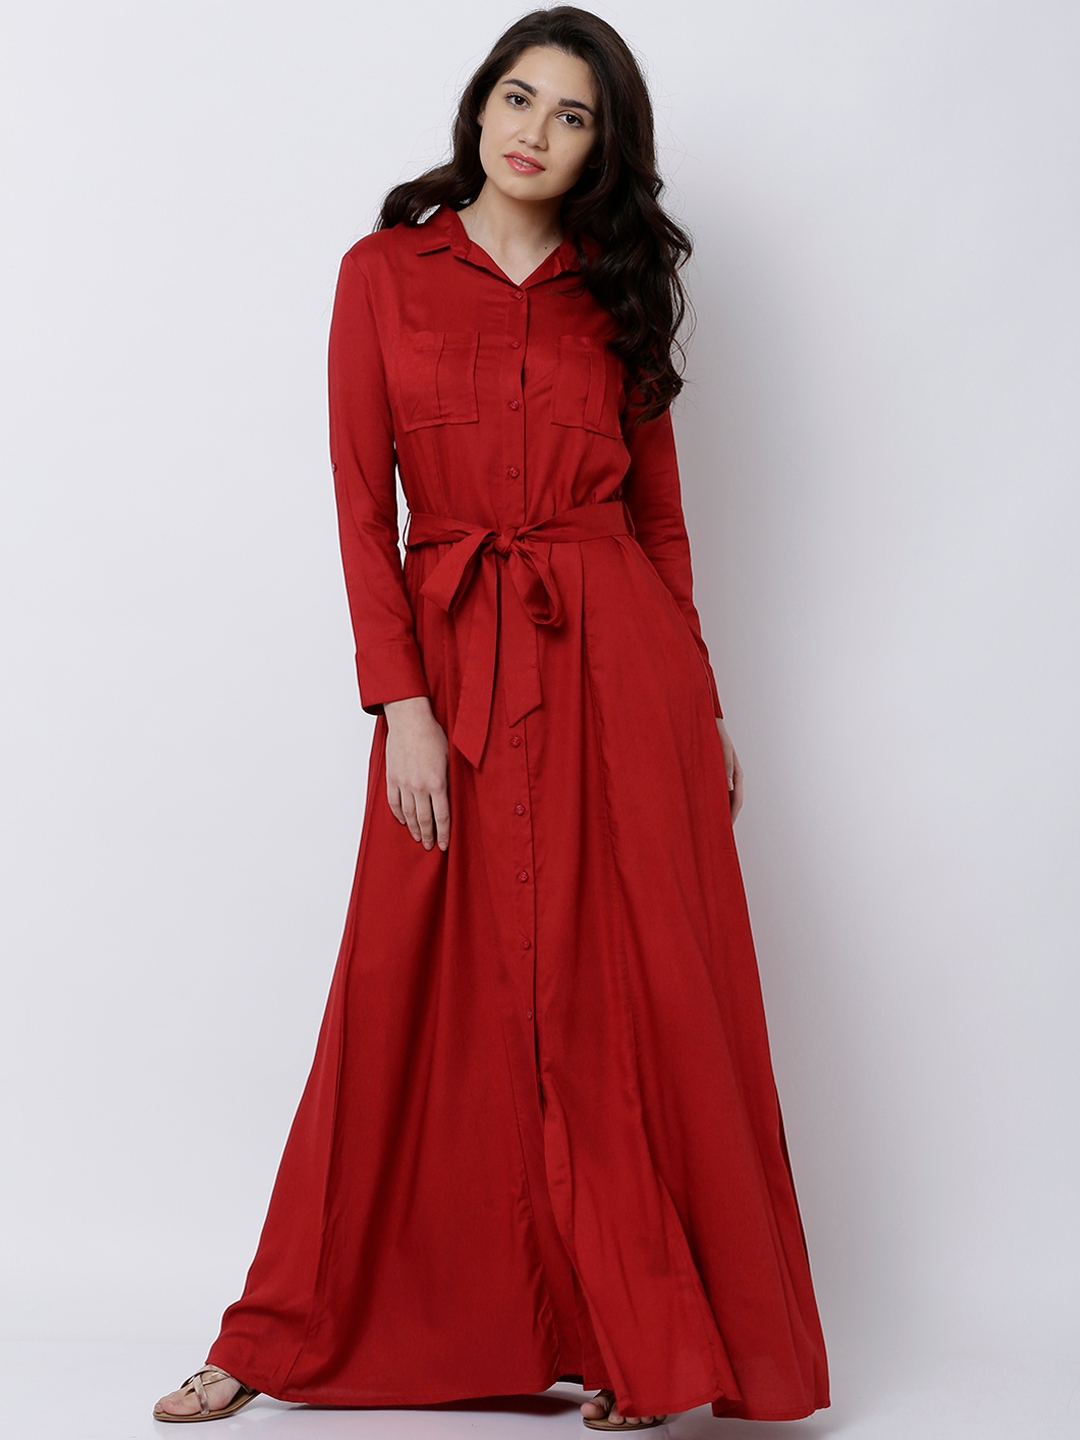 For 566/-(73% Off) Tokyo Talkies Women Red Solid Maxi Dress at Myntra